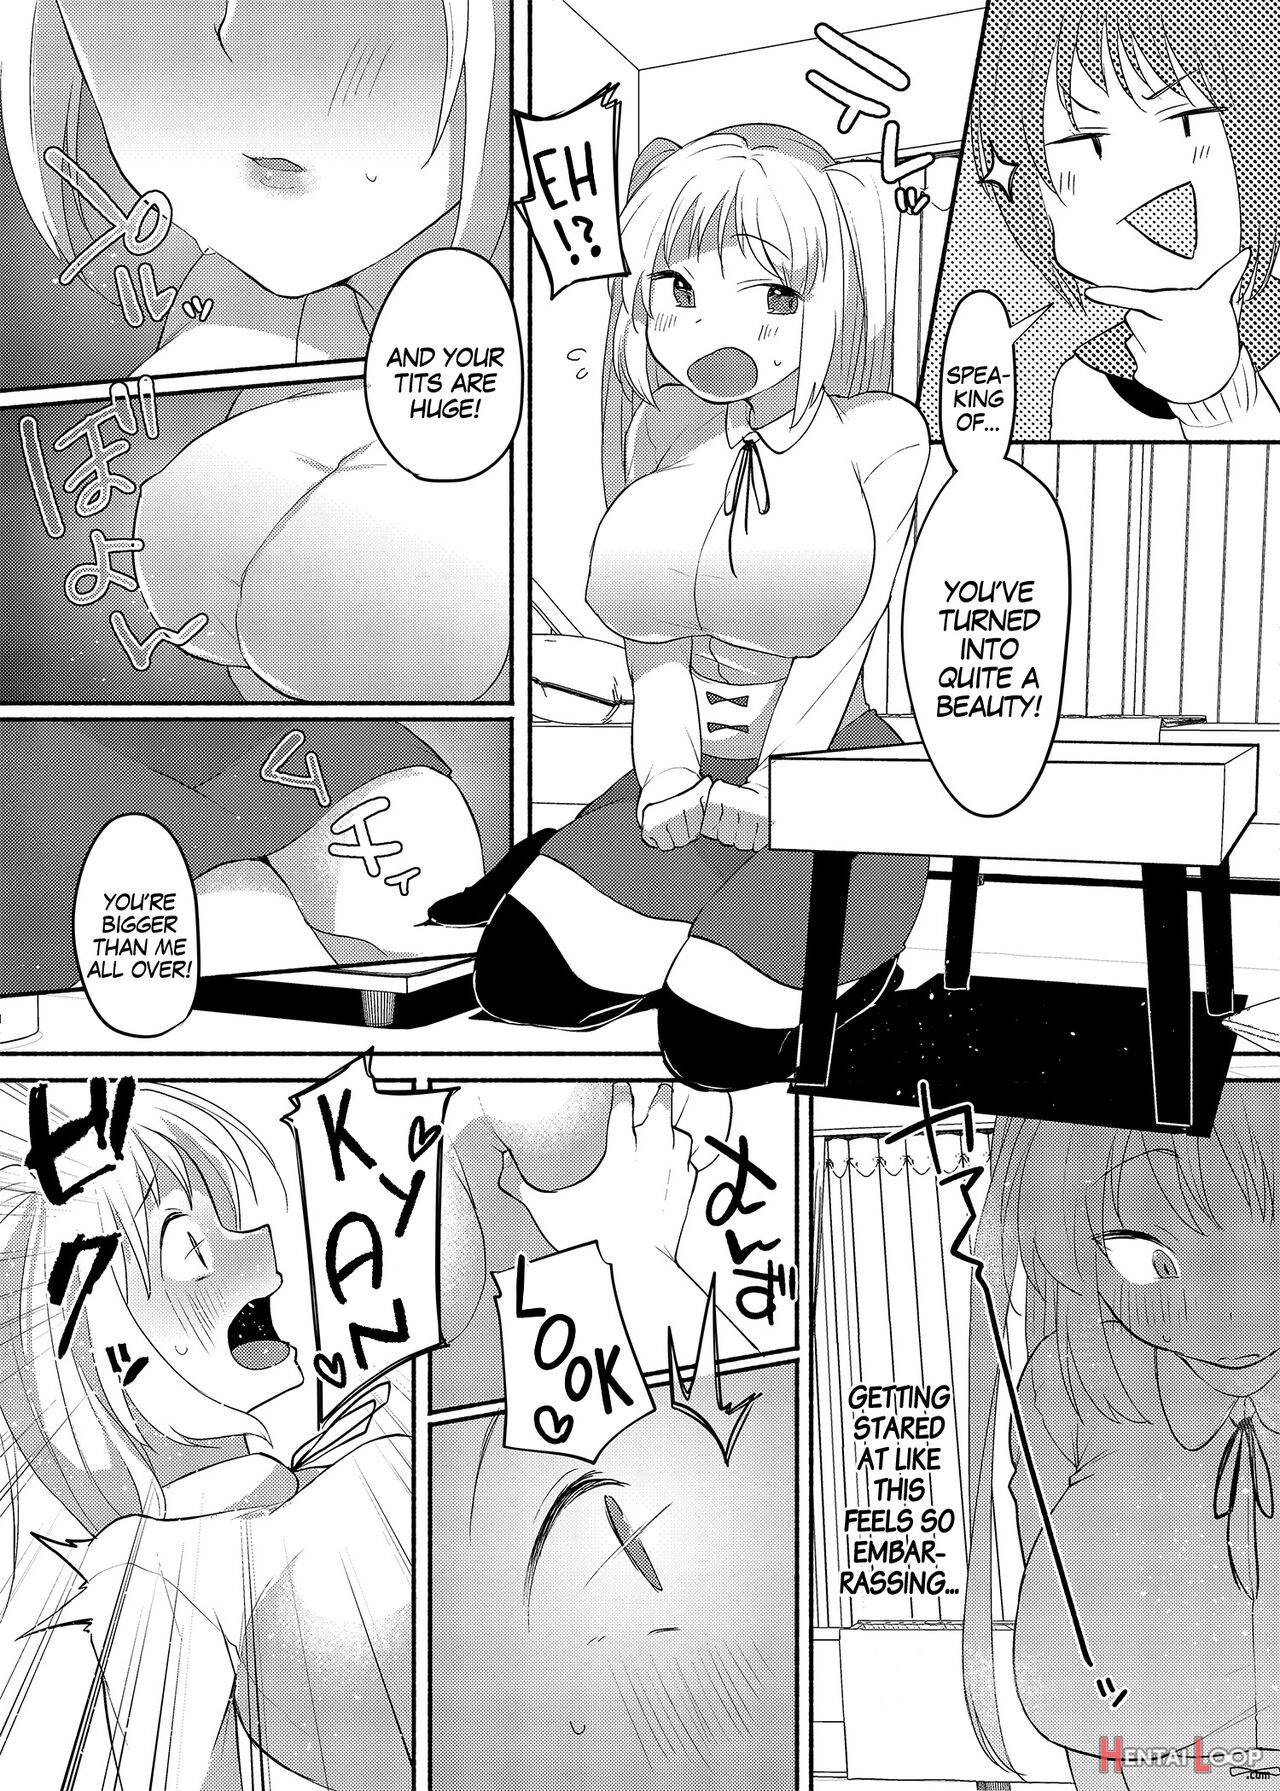 Crossdressing Fetish Gone Out Of Hand page 25